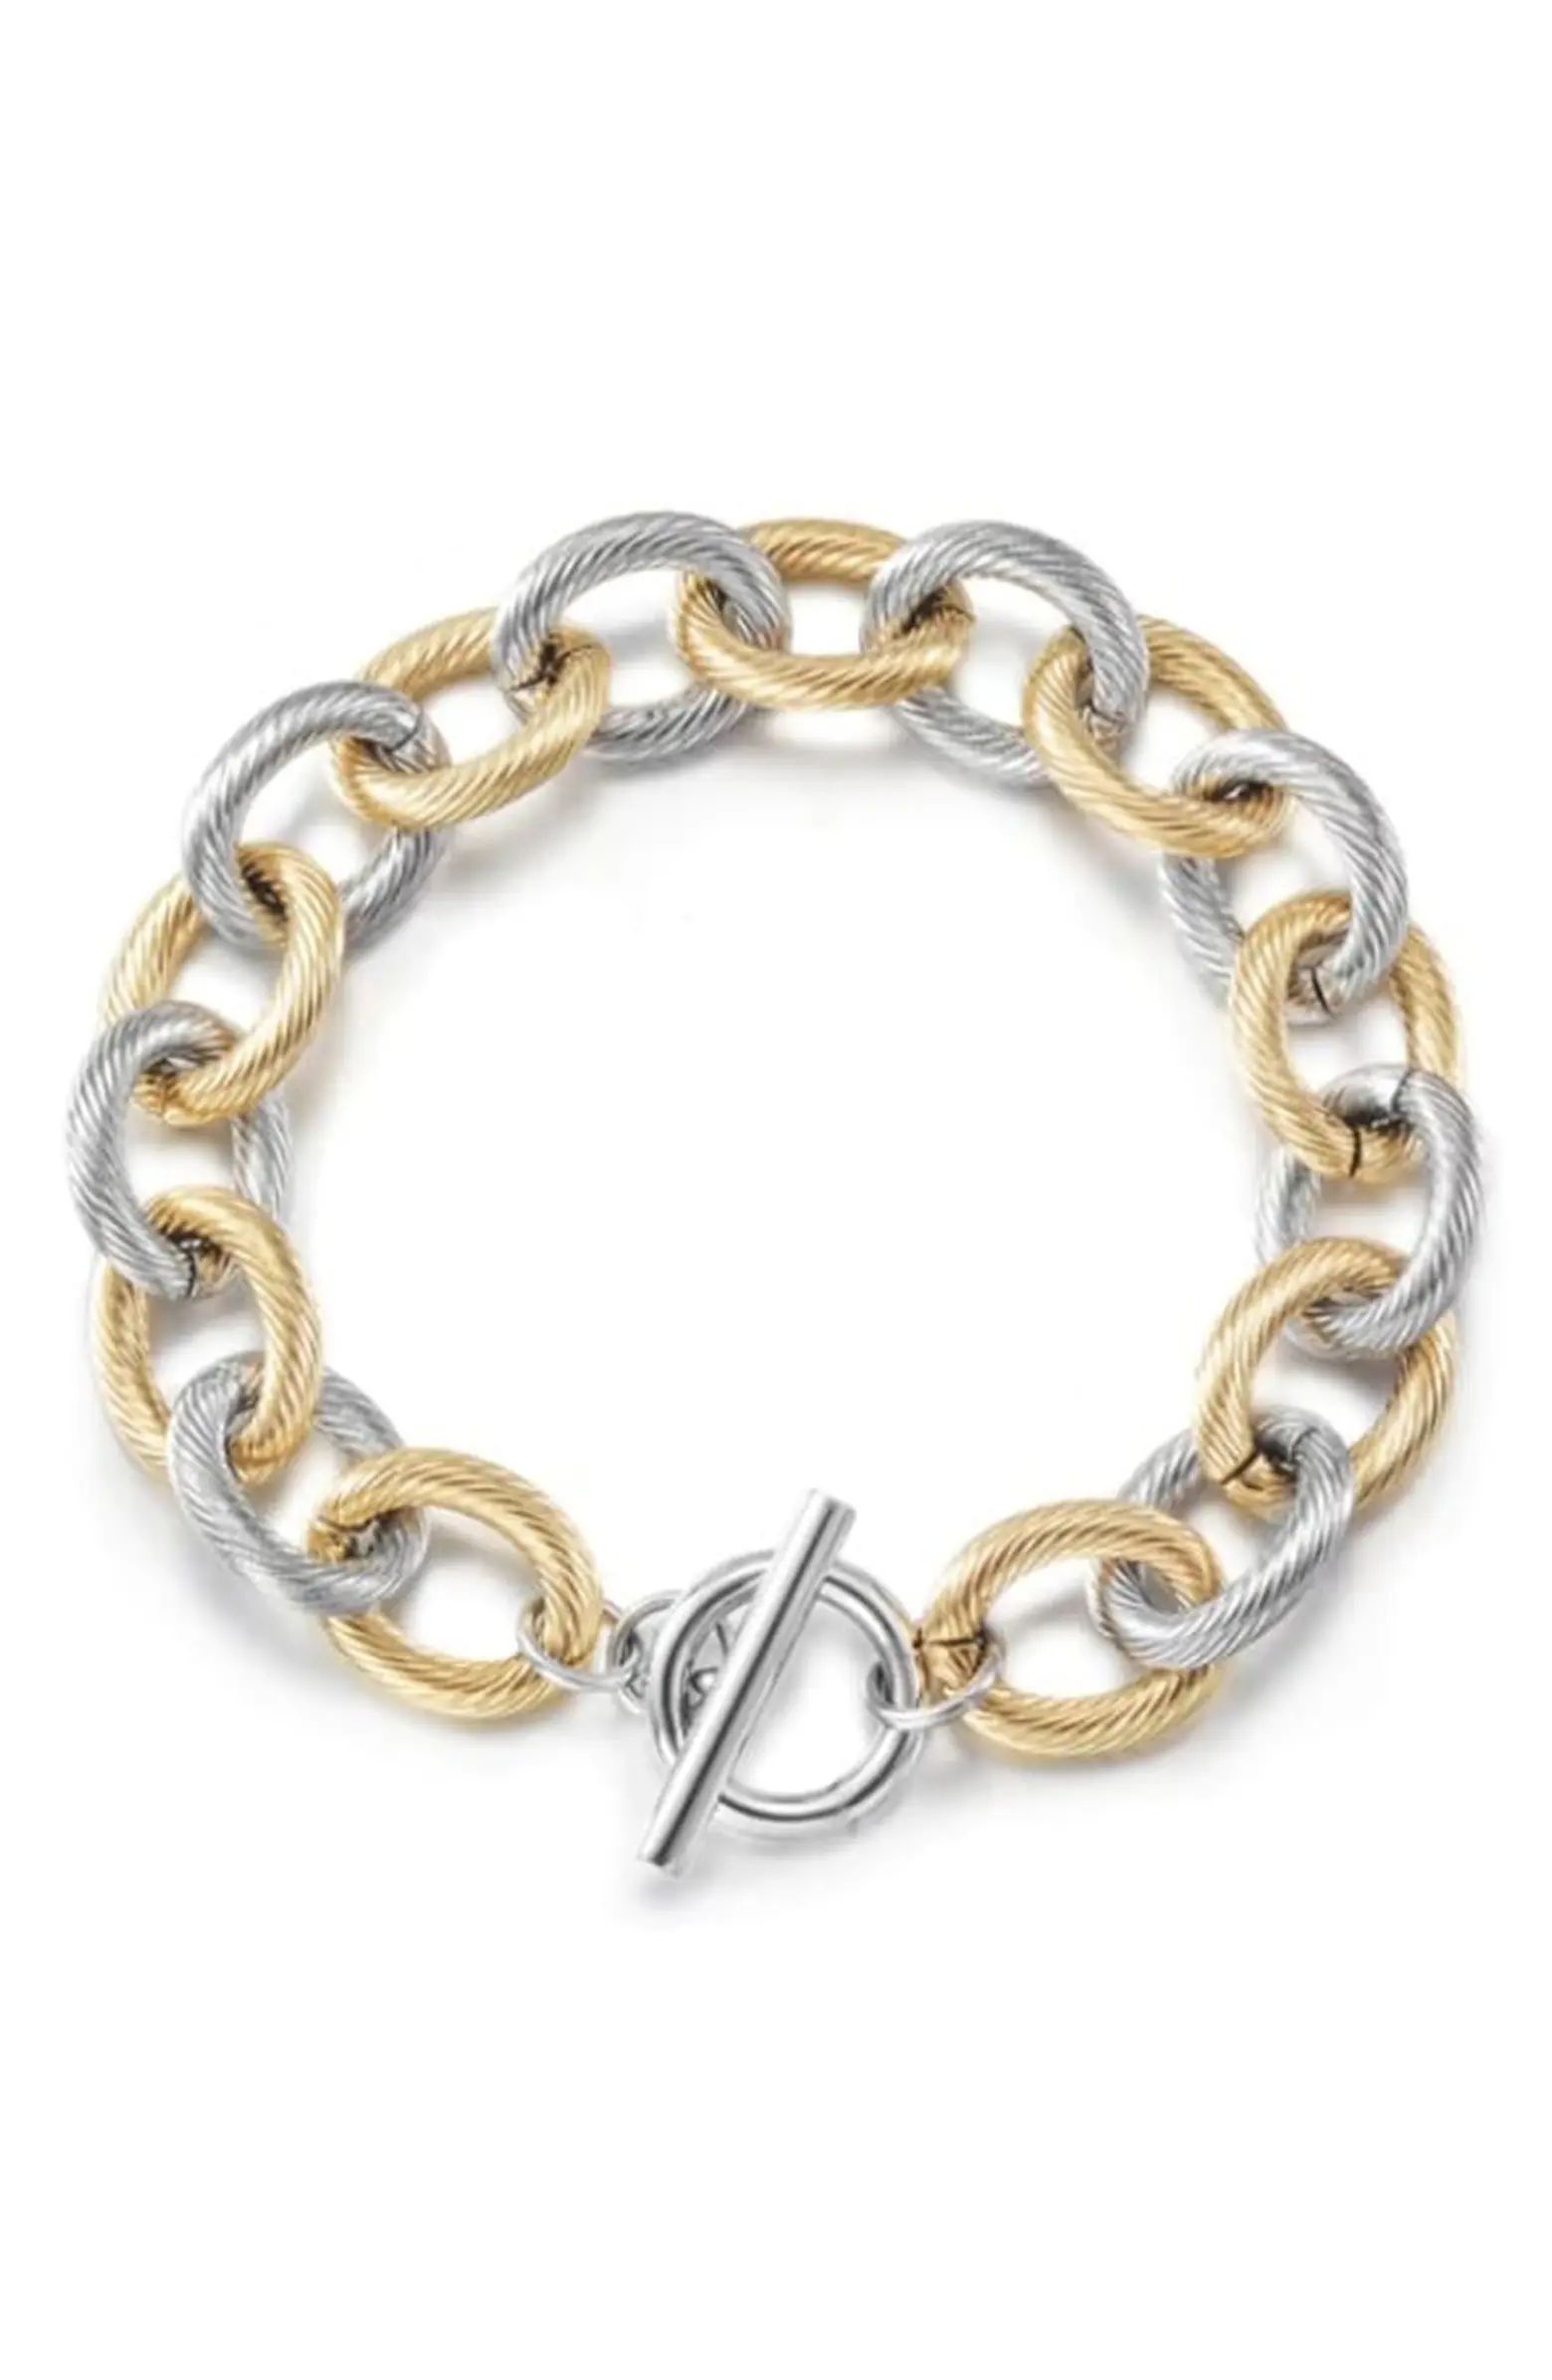 Jane Basch Designs Two-Tone Cable Chain Bracelet | Nordstrom | Nordstrom